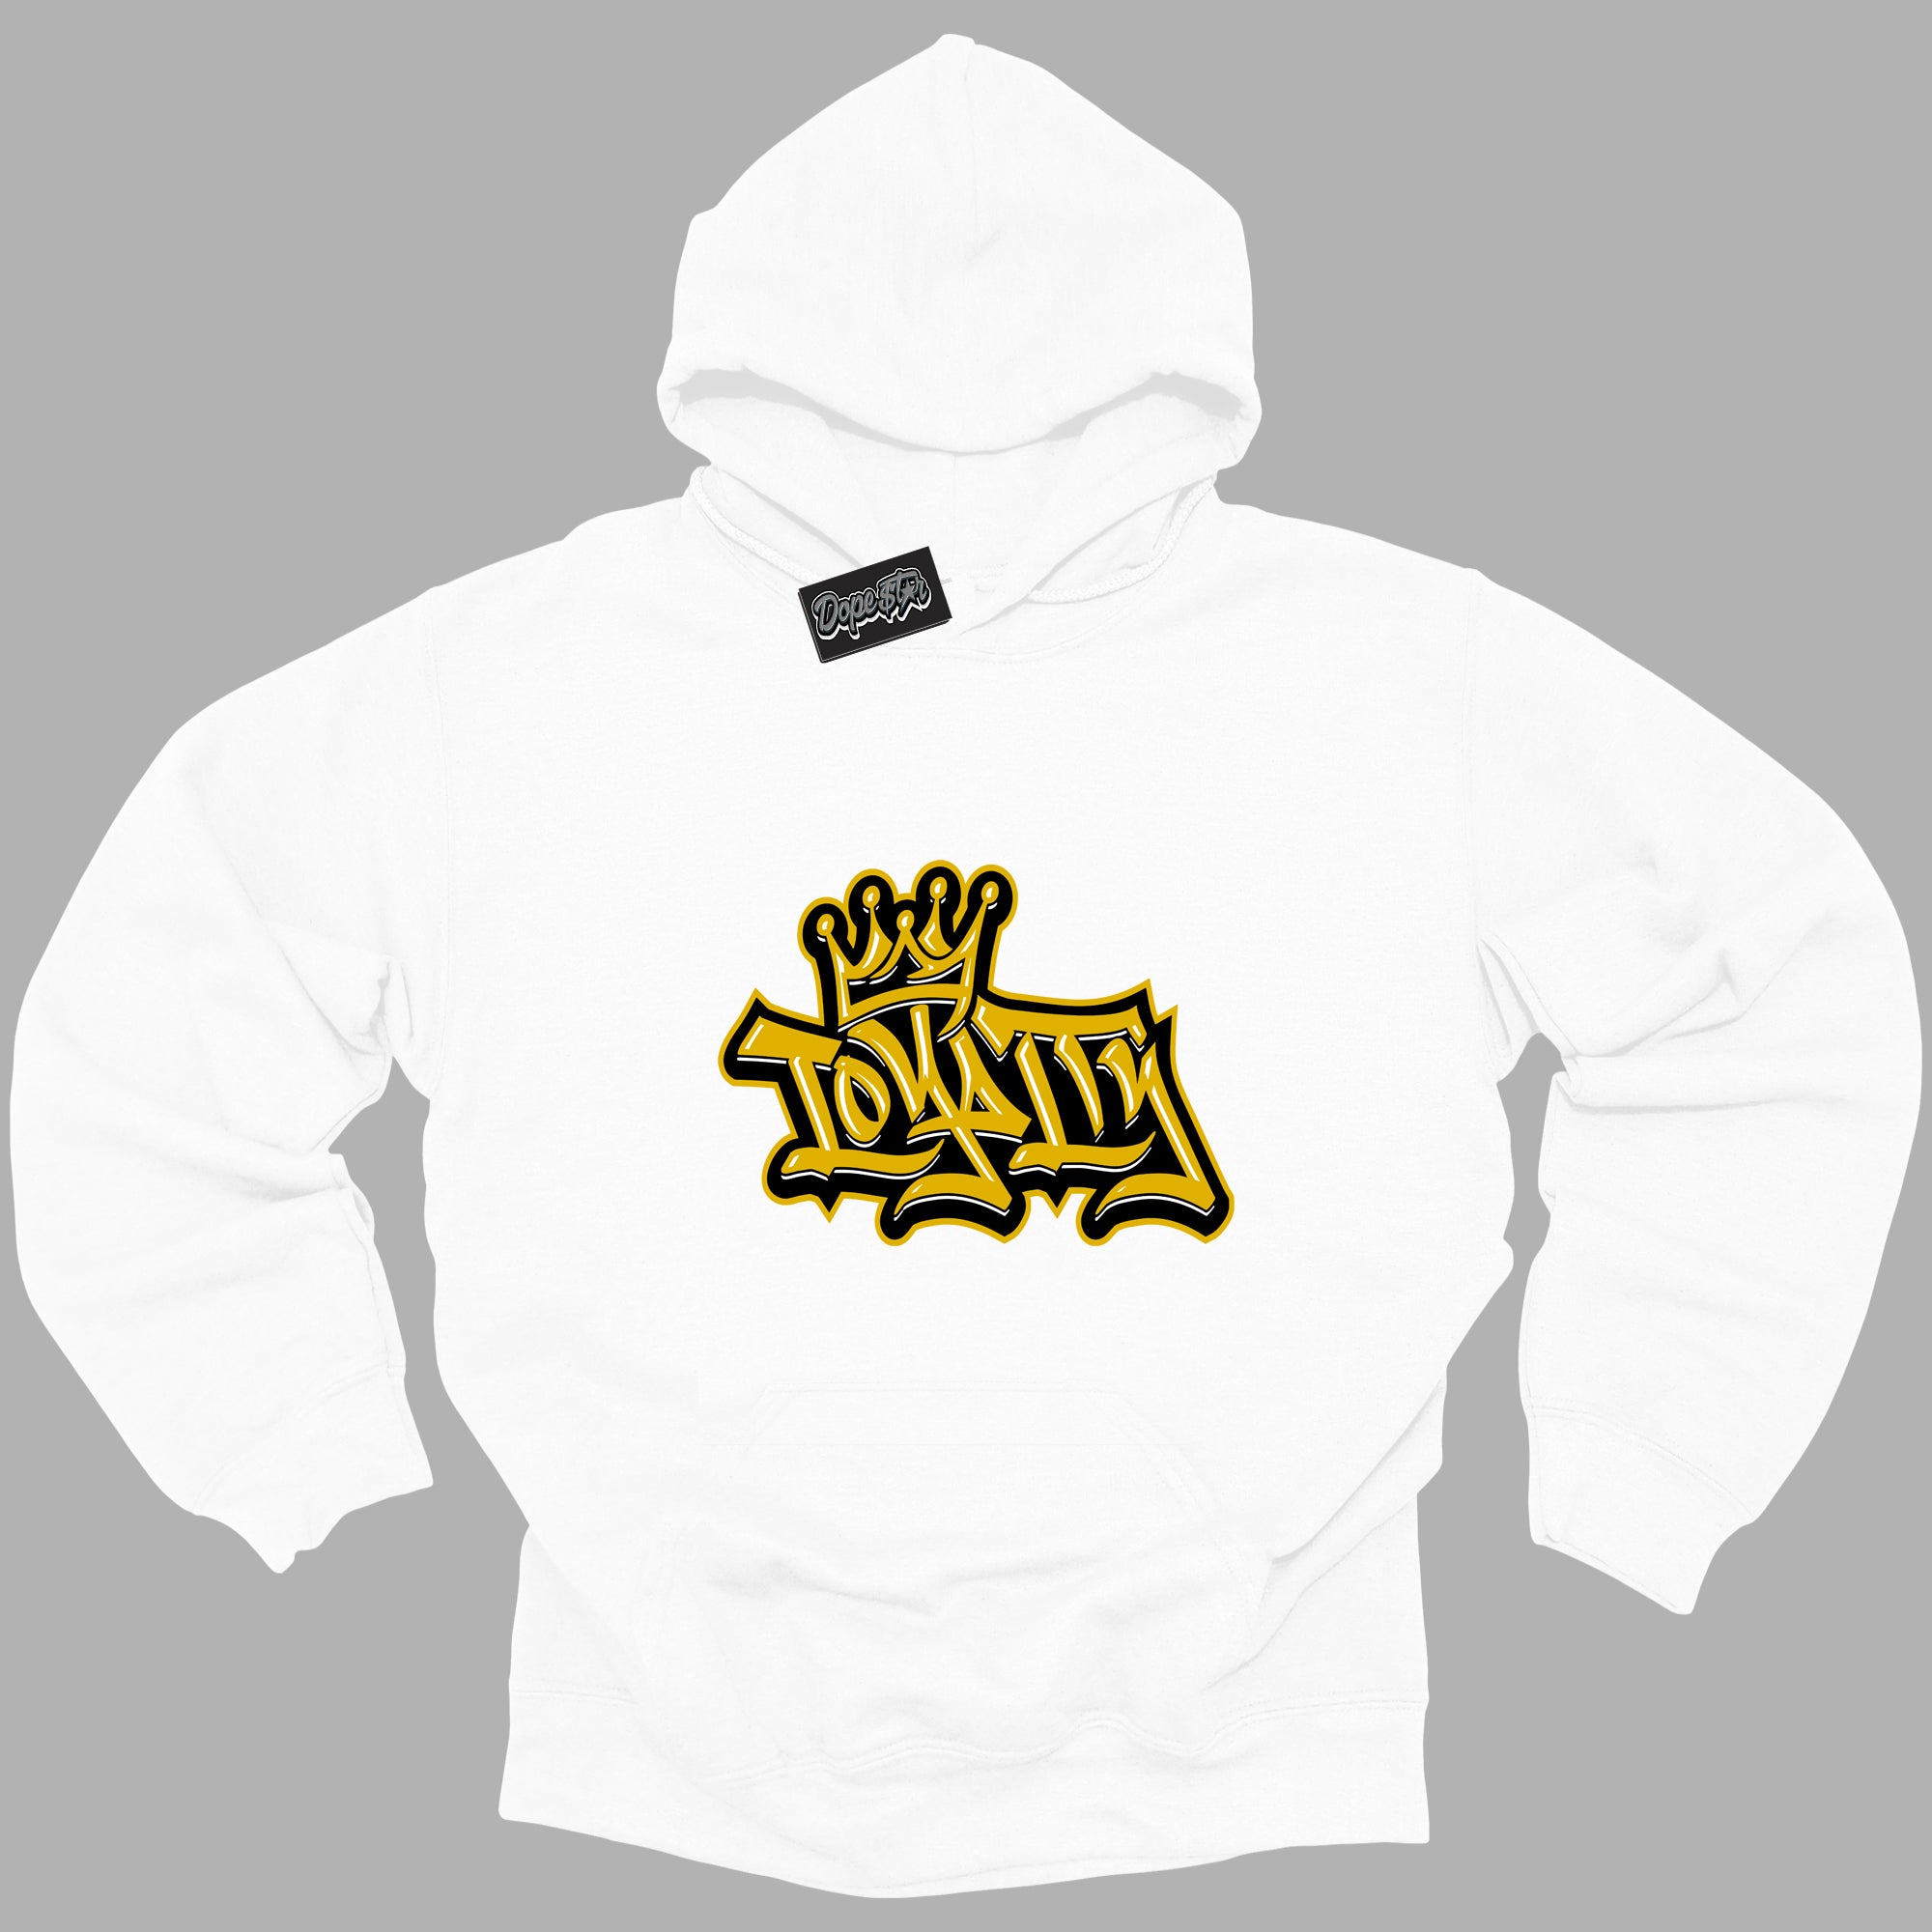 Cool White Hoodie with “ Loyalty Crown ”  design that Perfectly Matches Yellow Ochre 6s Sneakers.